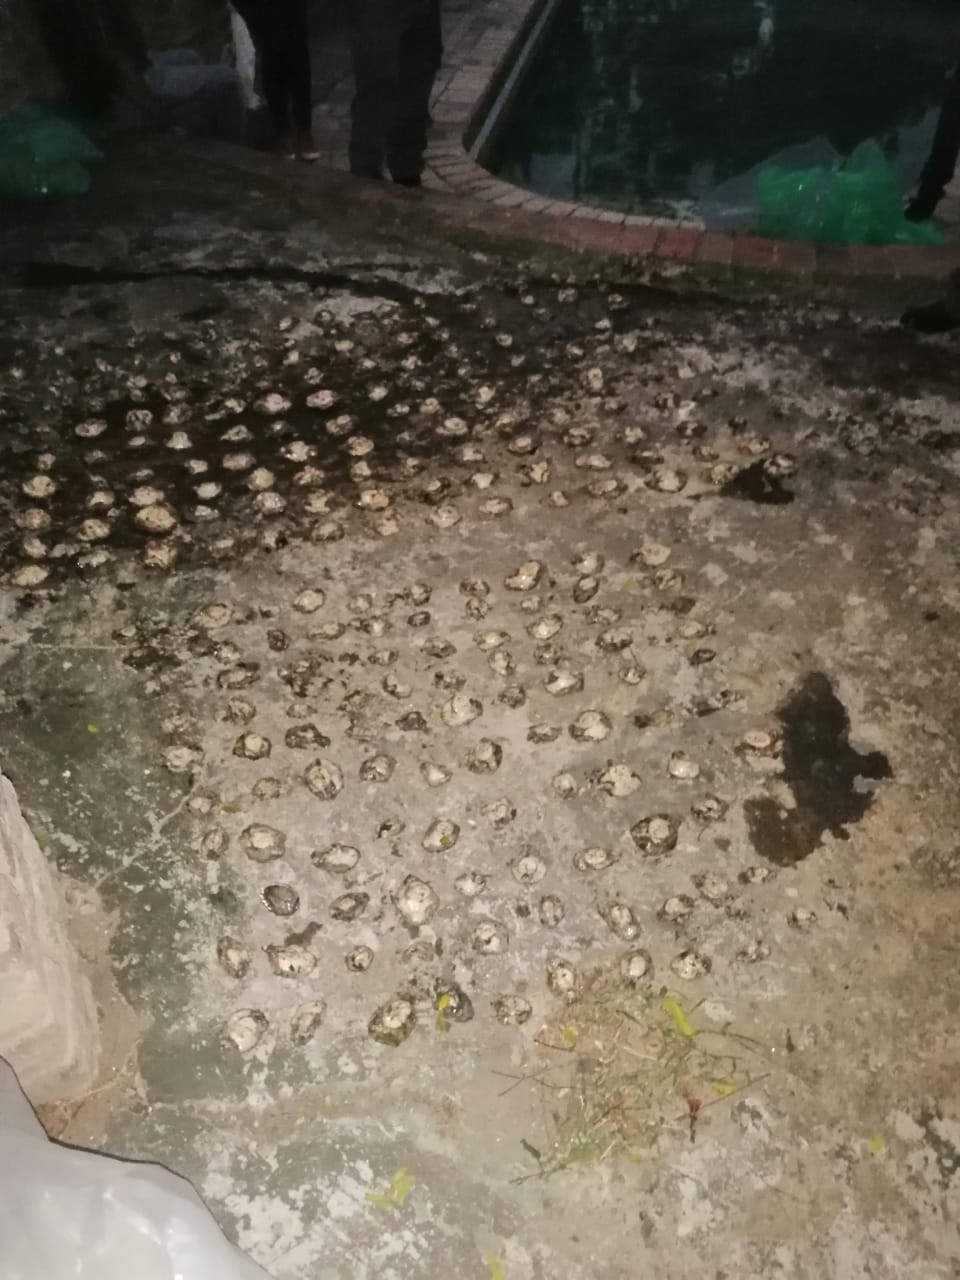 K9 Unit members arrest five suspects for possession of abalone in Amalinda